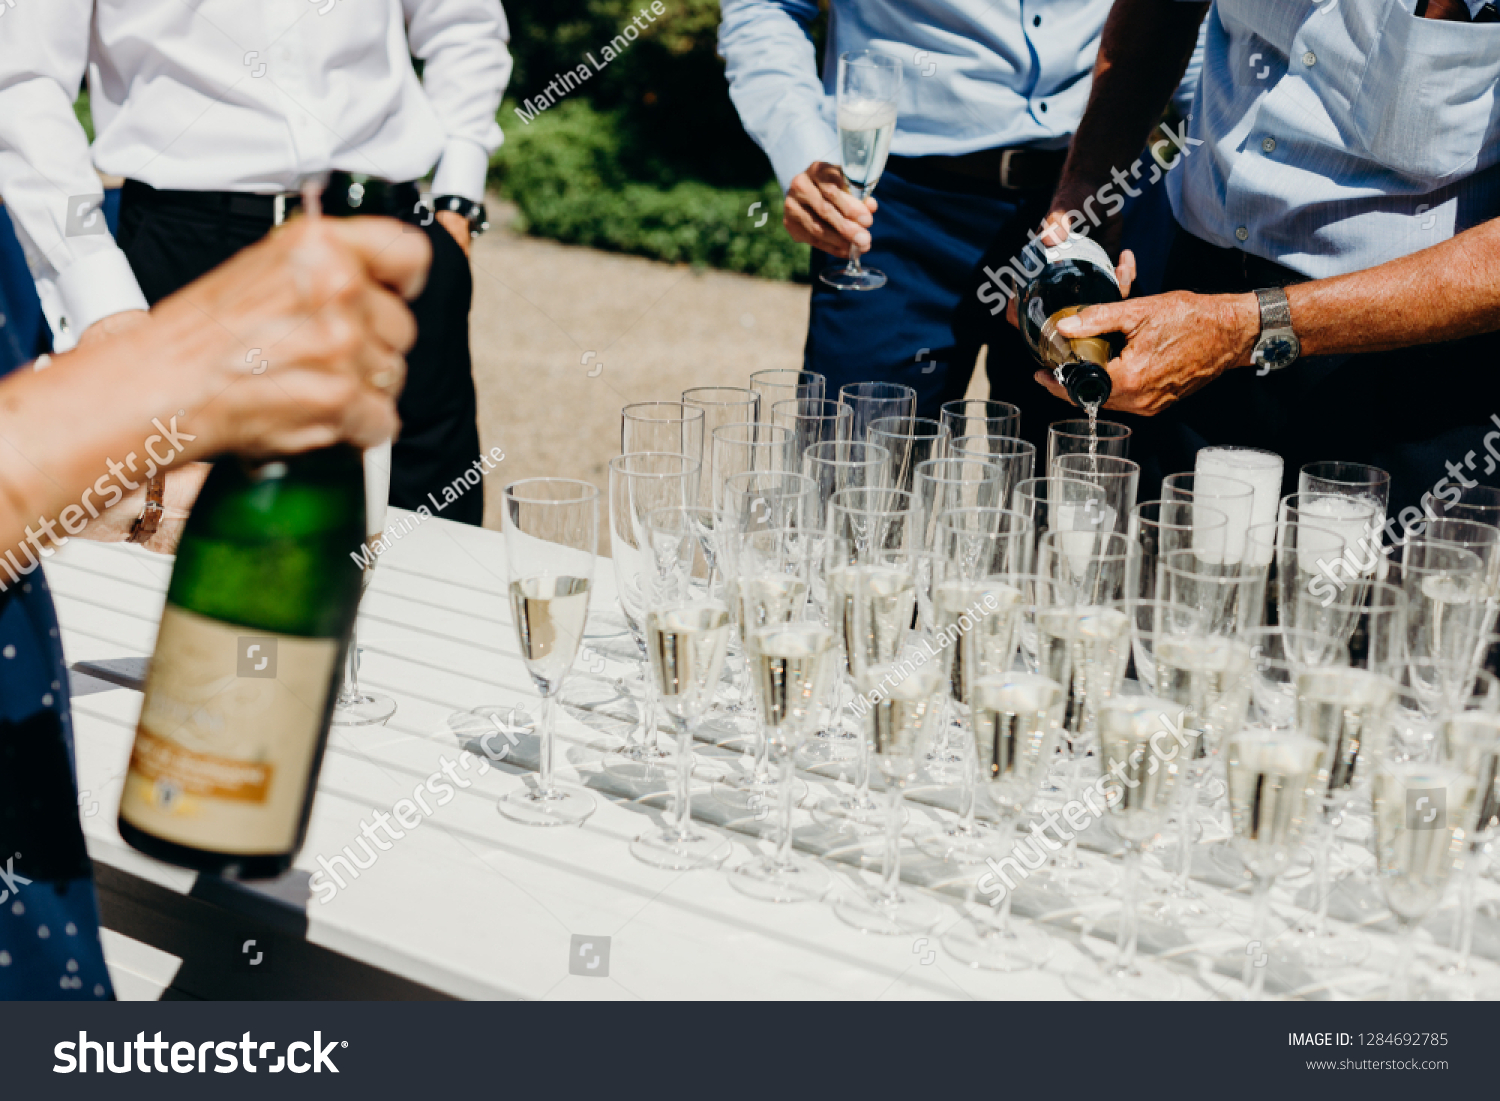 Popping bottles to celebrate bride and groom, wedding toast, hands #1284692785